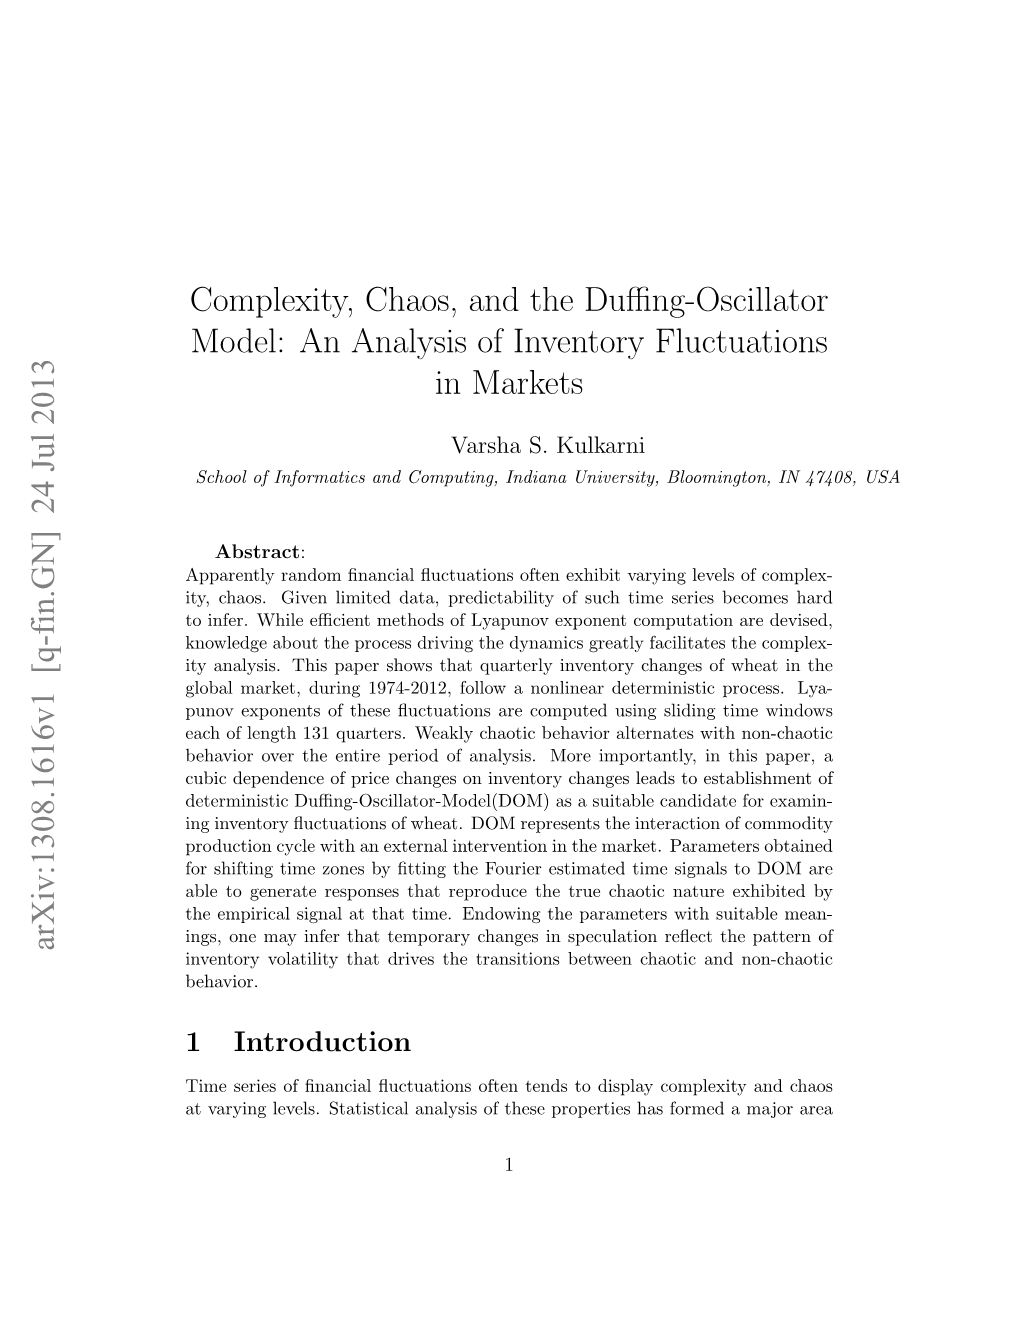 Complexity, Chaos, and the Duffing-Oscillator Model